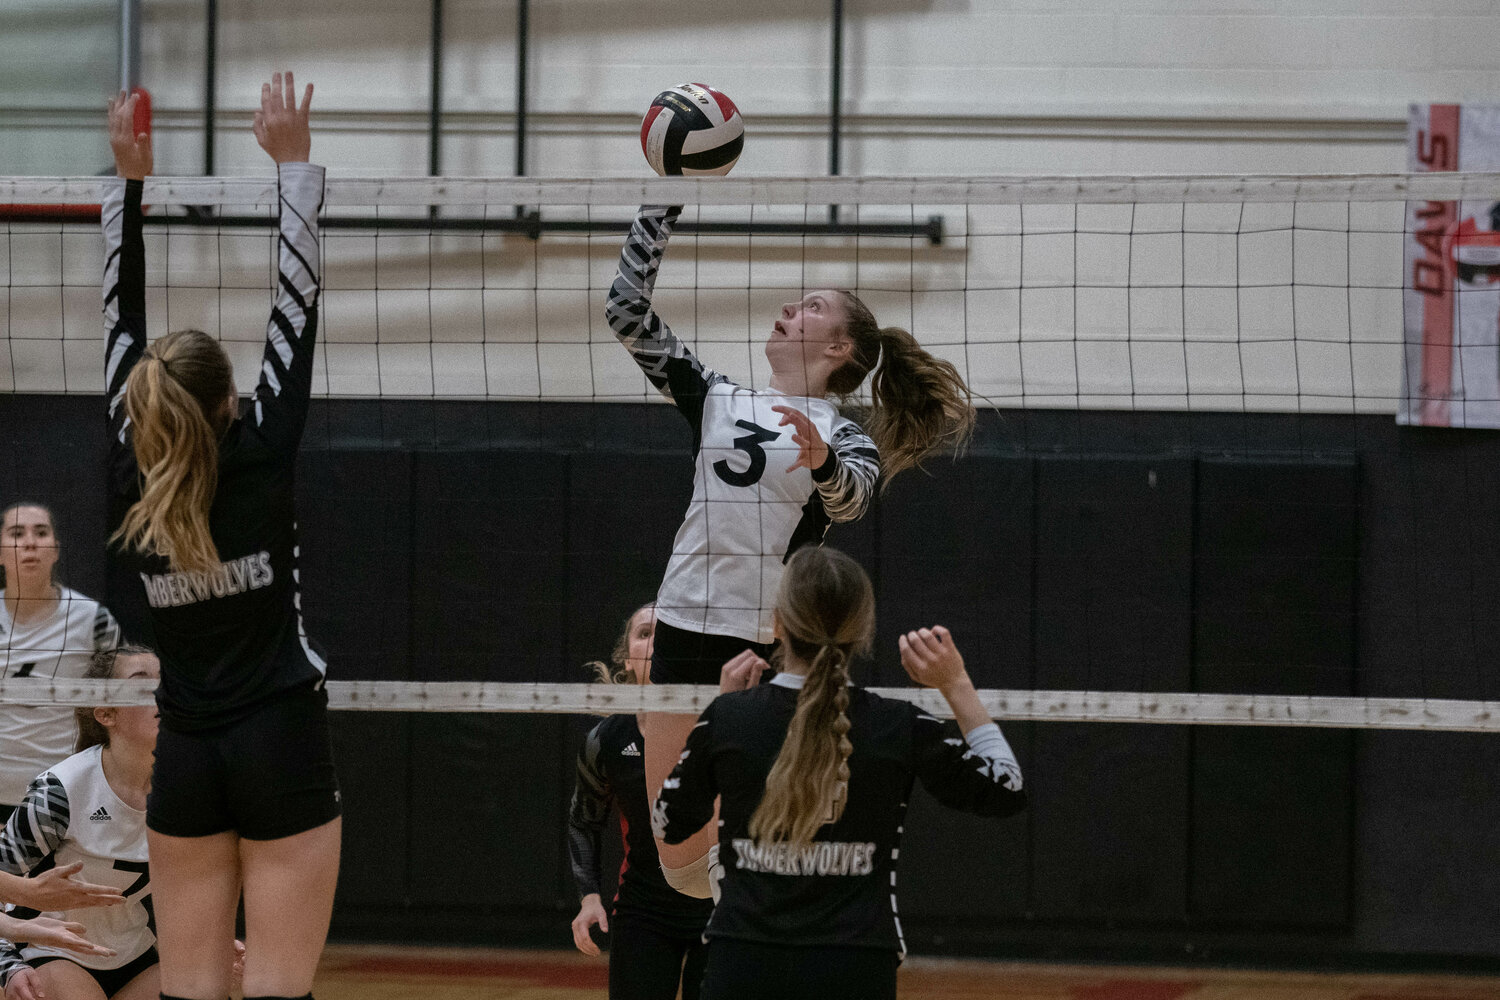 Ellie Fallon lines up a tip during the first set of Toledo's match against MWP on Oct. 19.